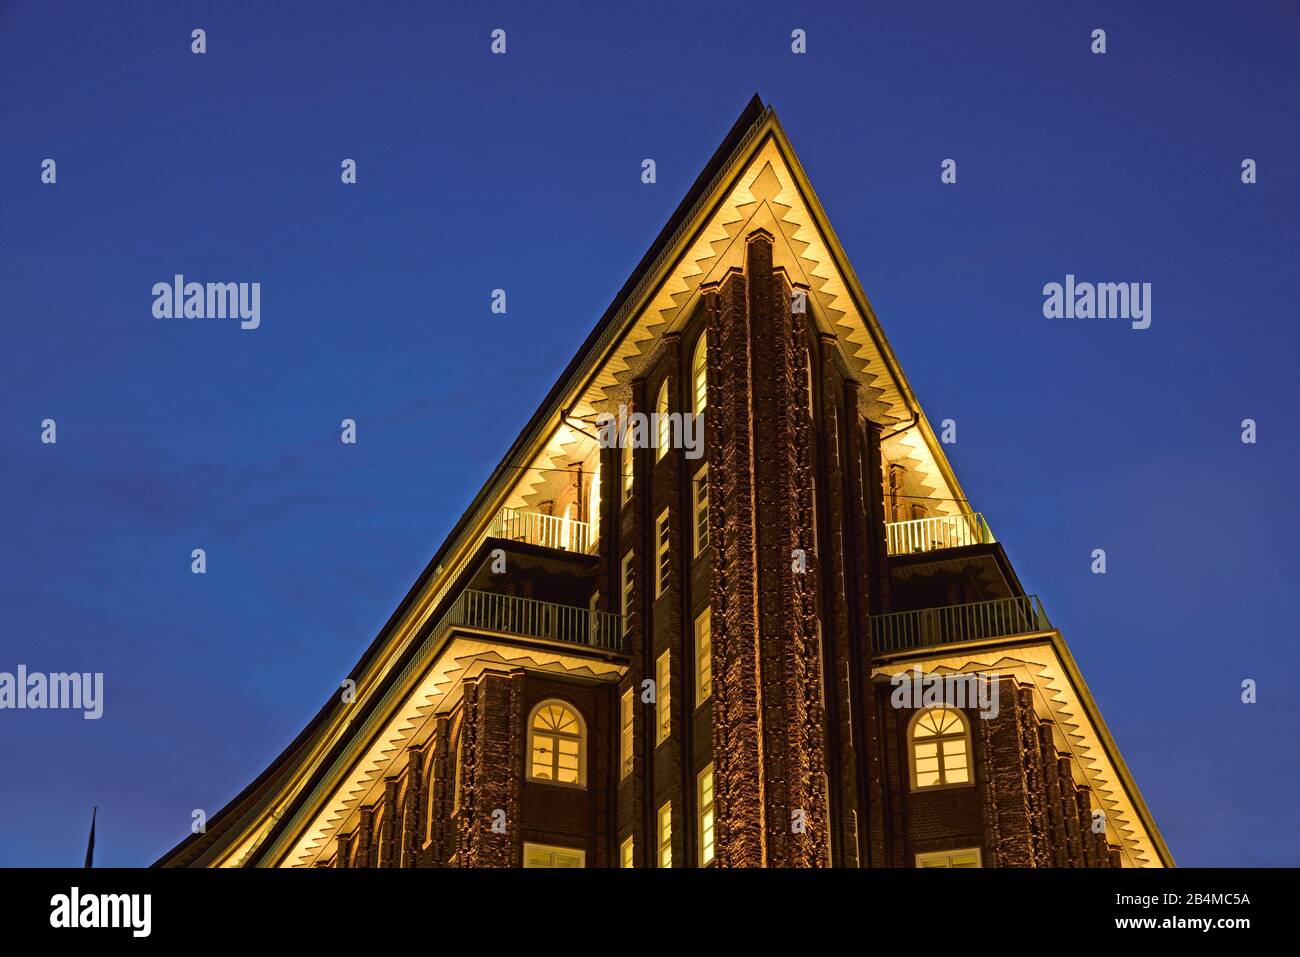 Europe, Germany, Hamburg, city, Kontorhausviertel, Chilehaus, clinker facade, built 1922 to 1924 by Fritz Höger, world cultural heritage, night, gable end, detail, roof top, Stock Photo